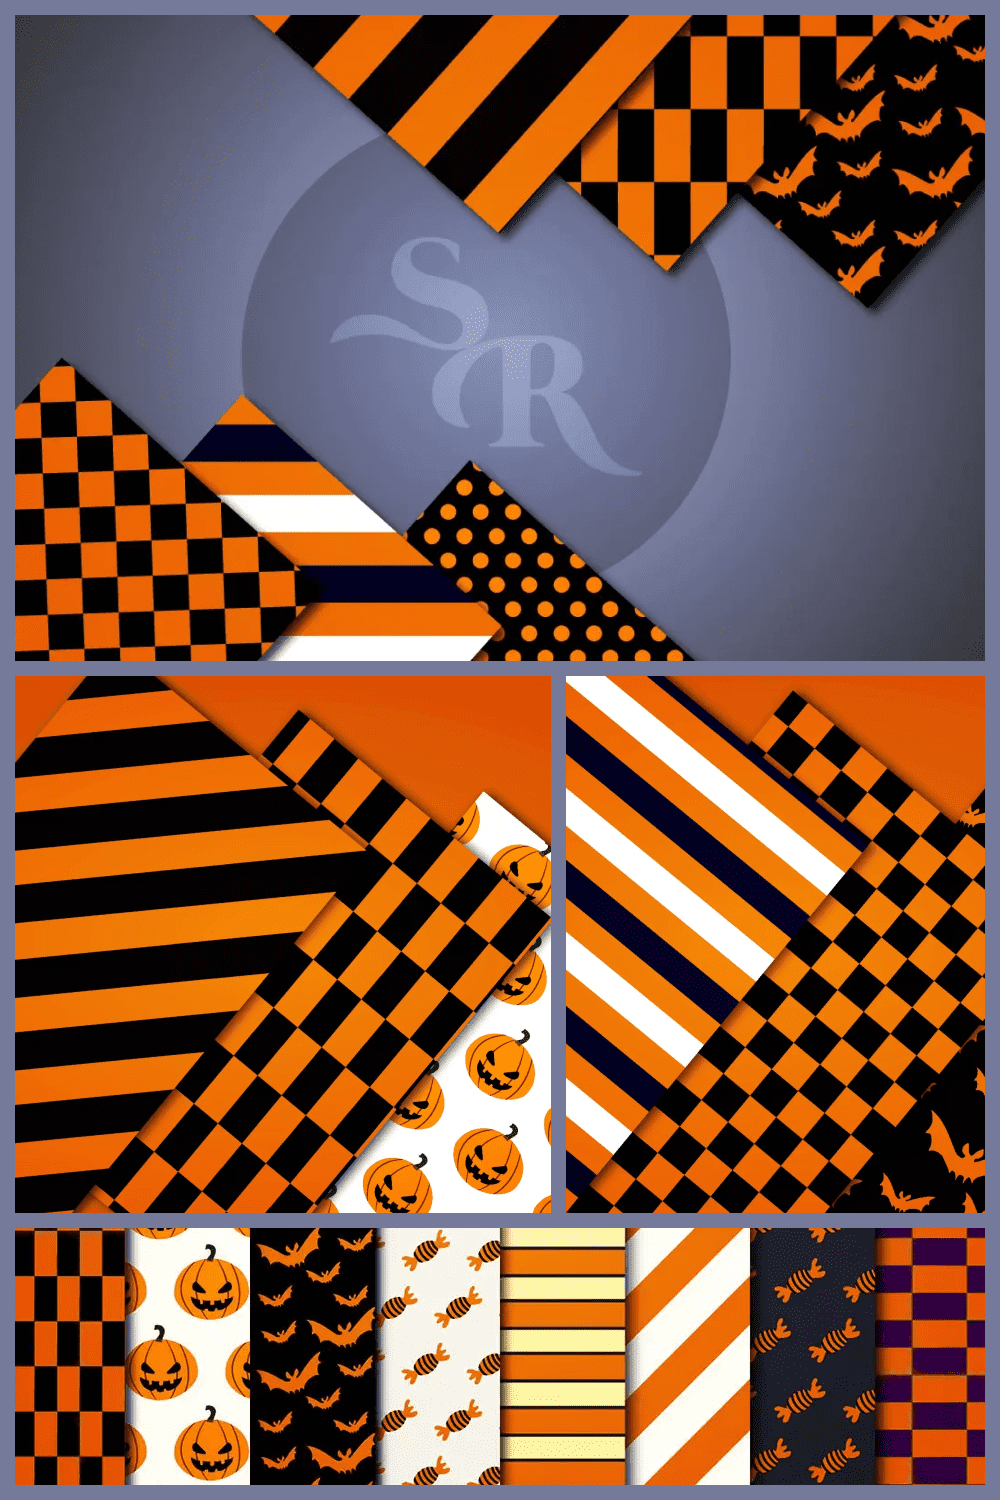 Collage of images of black and orange wrapping paper with pumpkins and bats.